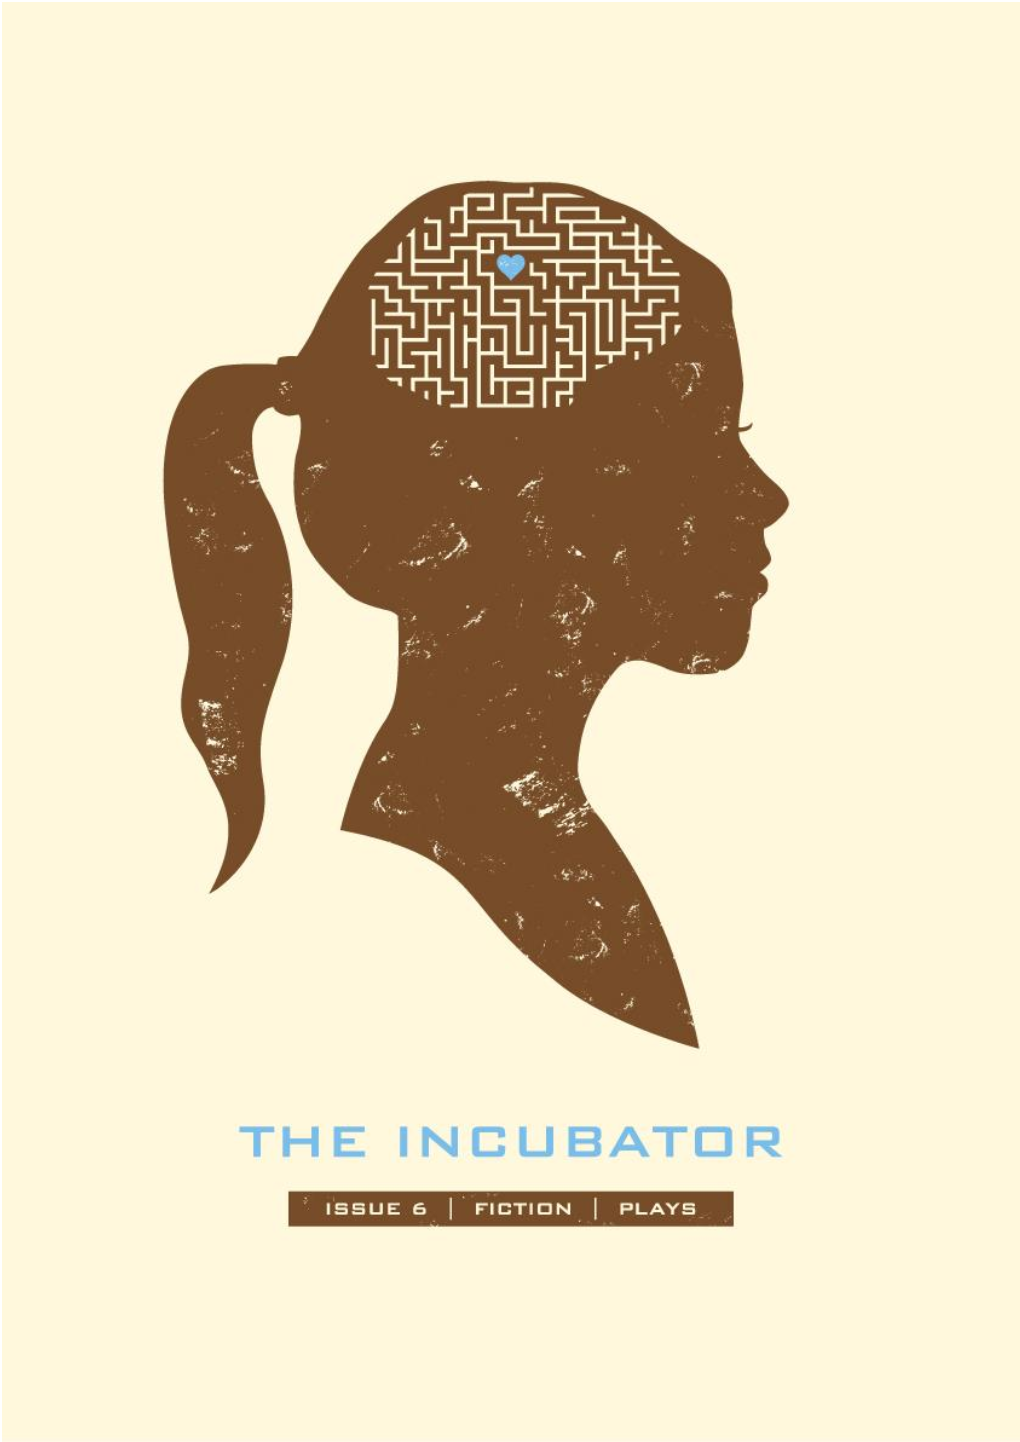 The Incubator Journal Issue 6